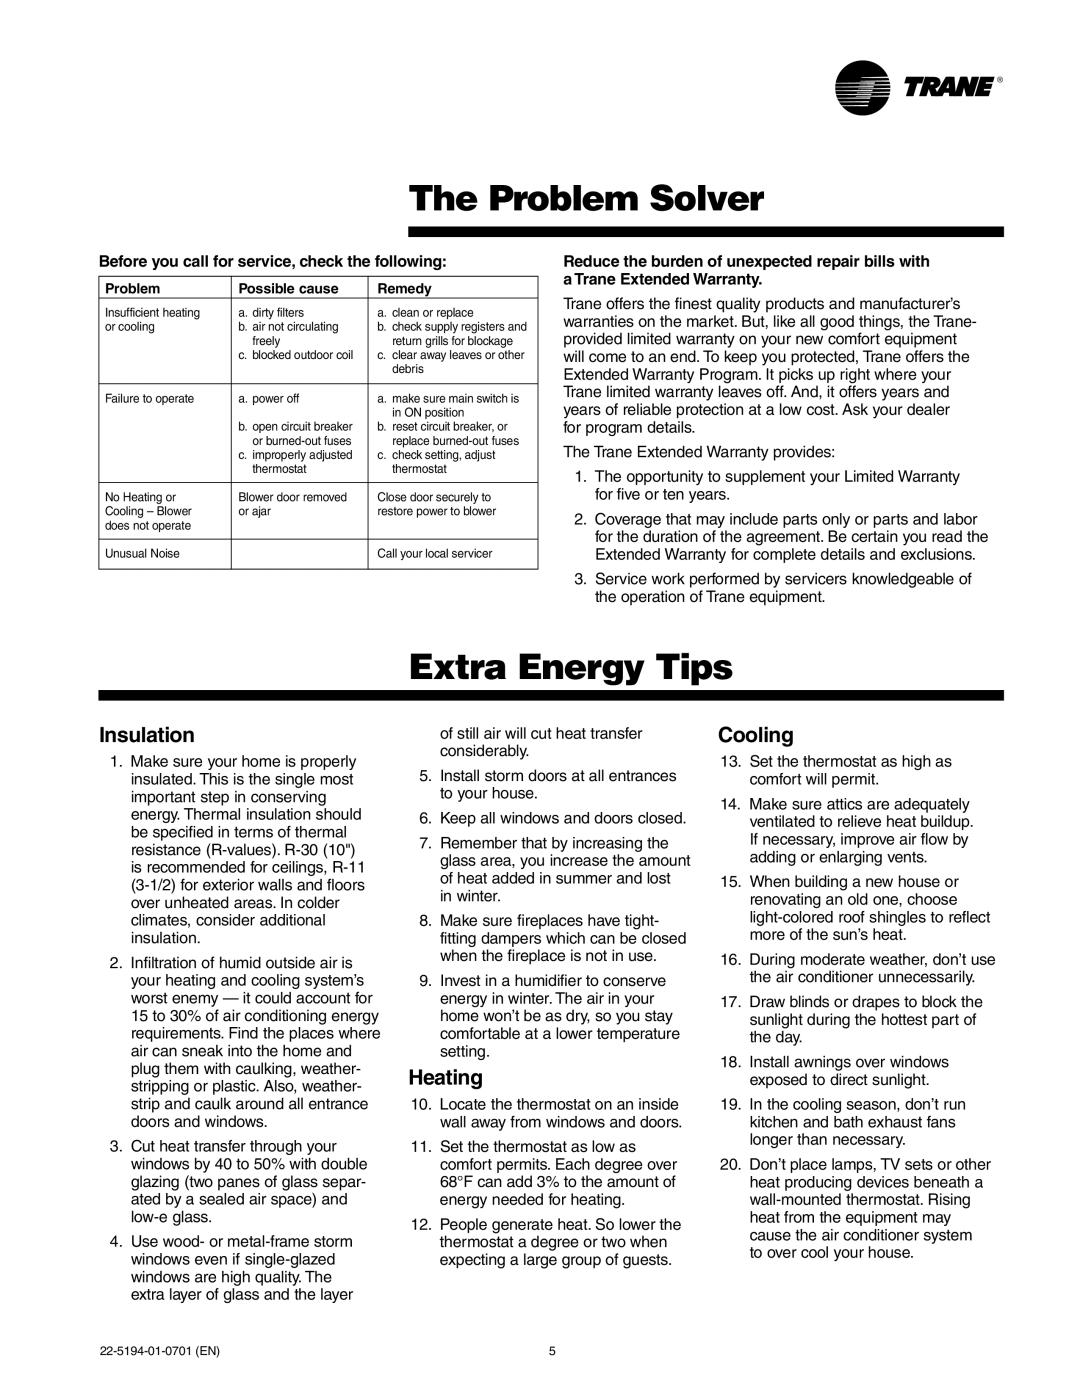 Trane XL manual The Problem Solver, Extra Energy Tips, Insulation, Heating, Cooling 